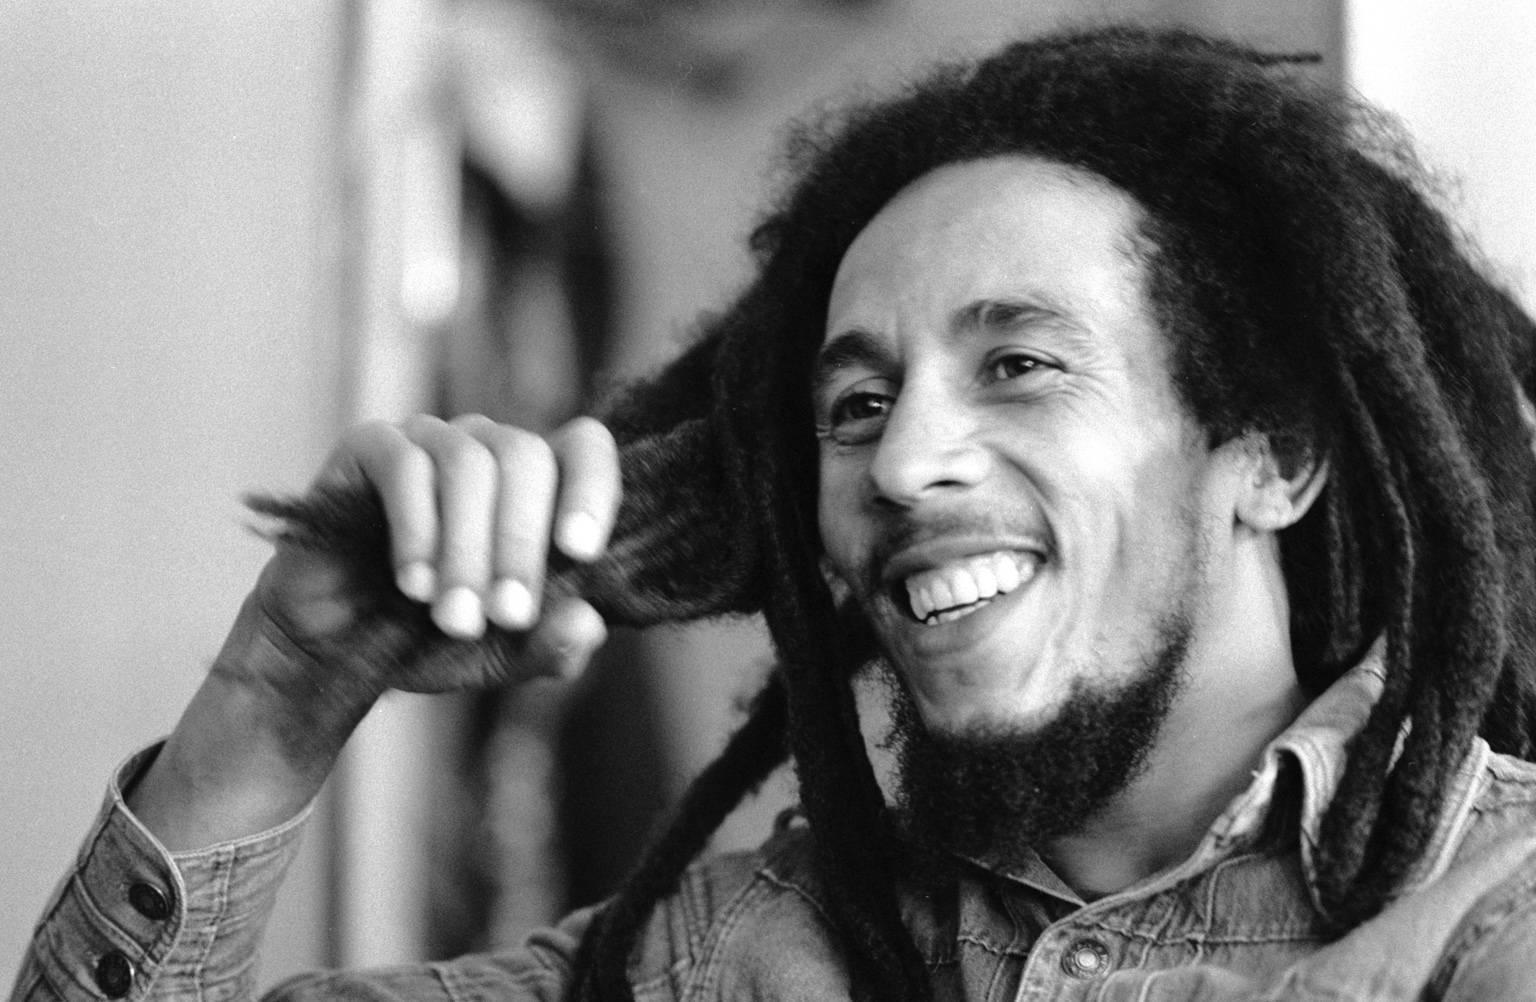 Unknown Black and White Photograph - 'Bob Marley Smile' 1978 ( Galerie Prints Limited Edition)